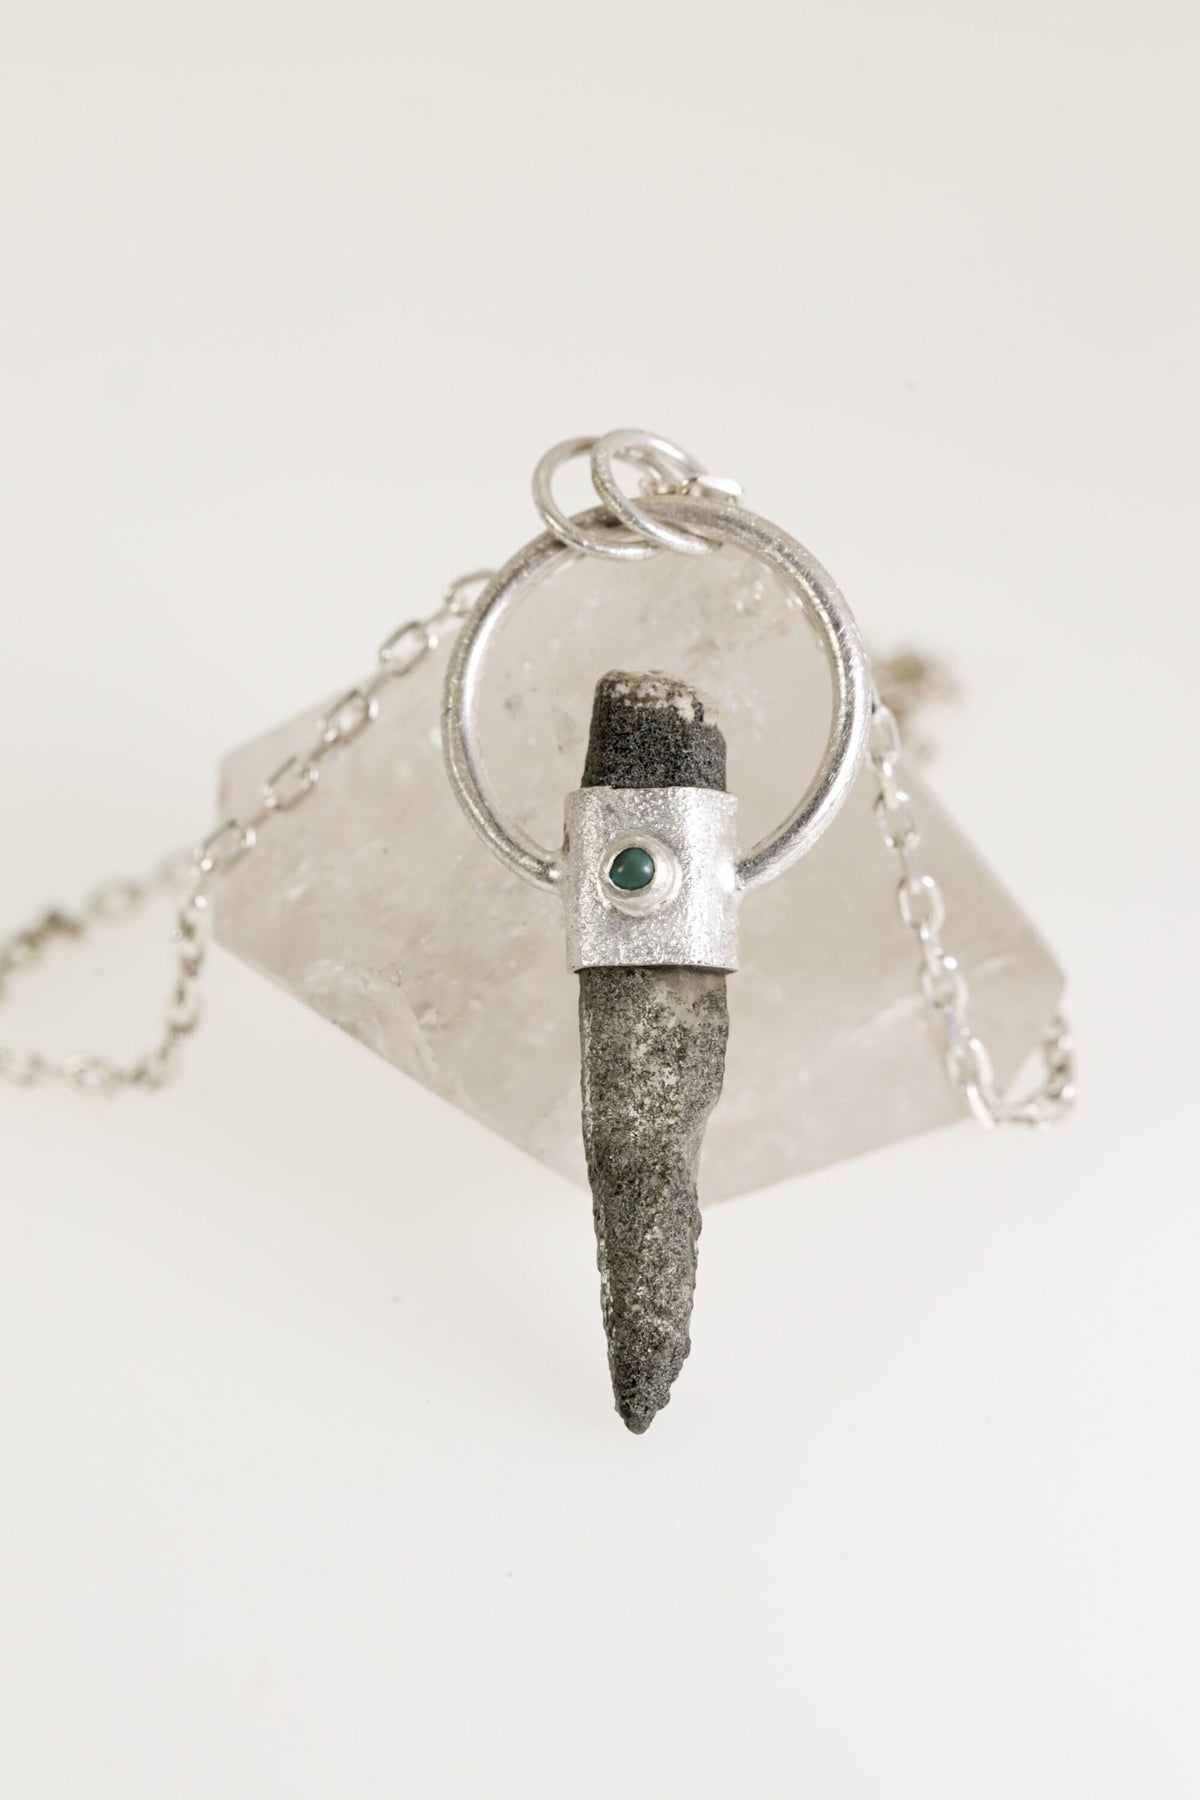 Emerald Whisper: Sterling Silver Sand-Textured Crystal Pendant with Himalayan Chlorite Quartz and Emerald